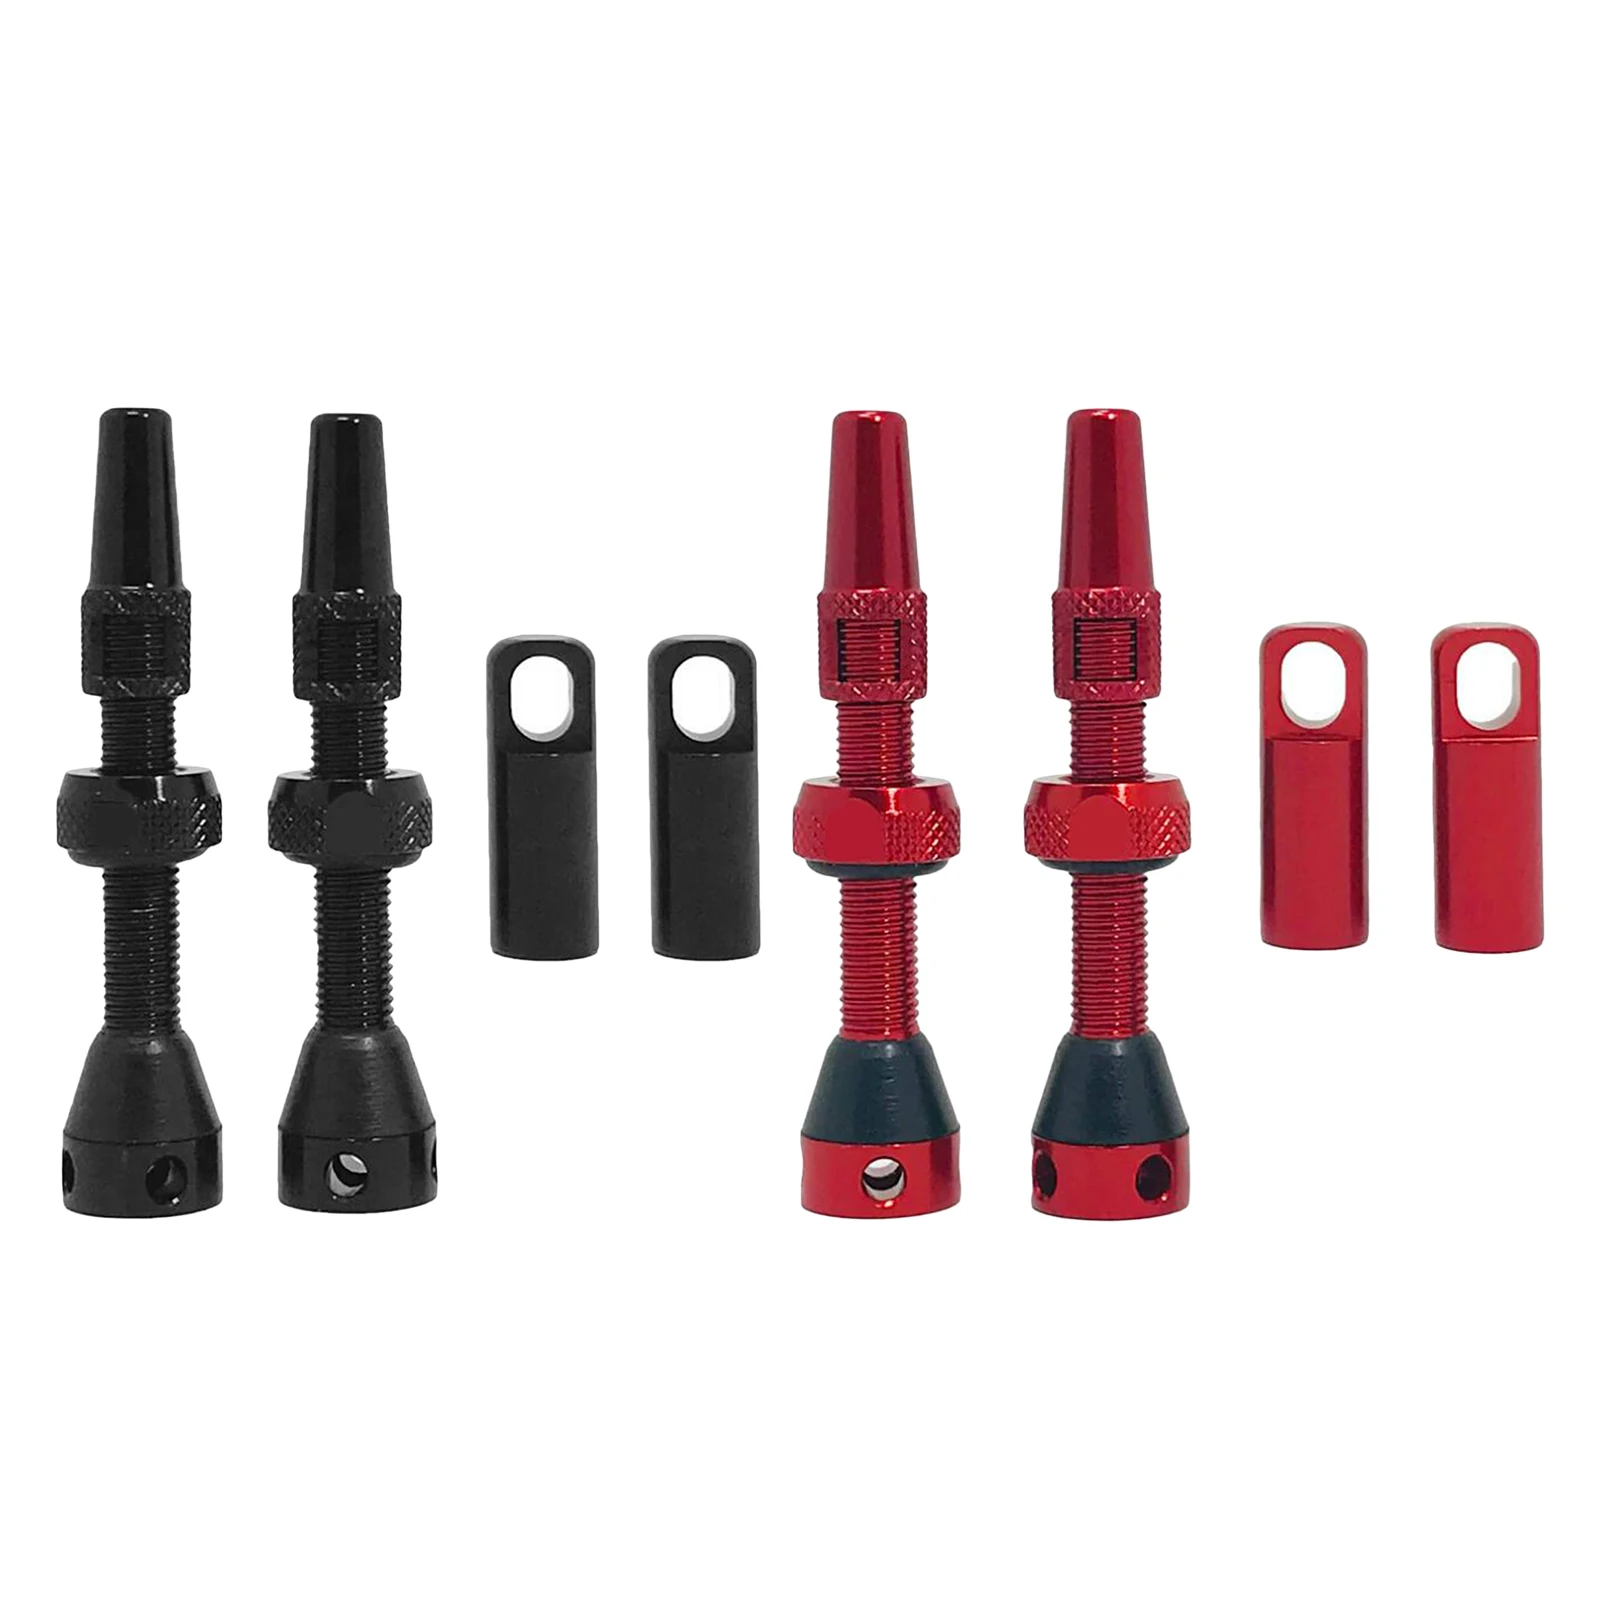 Valve Stem Cores Replacement Removal Tool for Bicycle Bike Tubeless Red